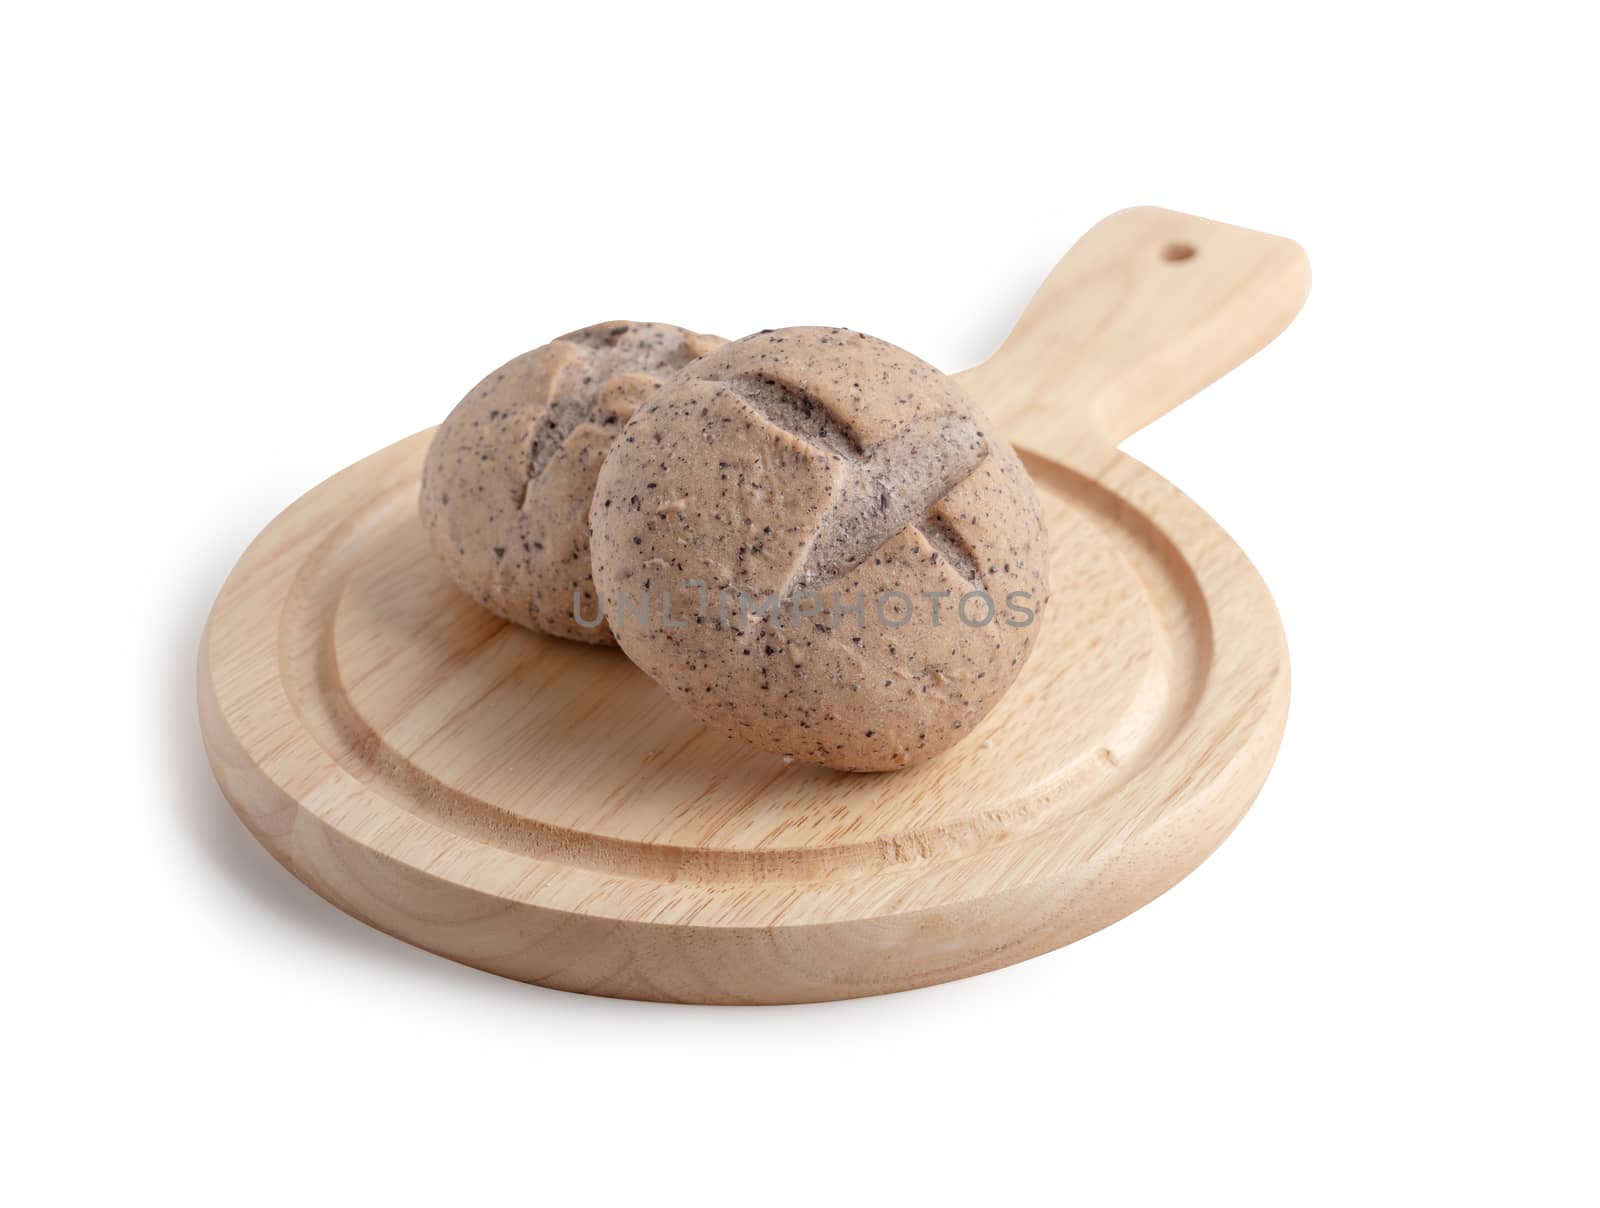 Homemade buns on the cutting board isolated on the white background with clipping paths. Bread is a food made from wheat flour mixed with water and yeast or baking powder.